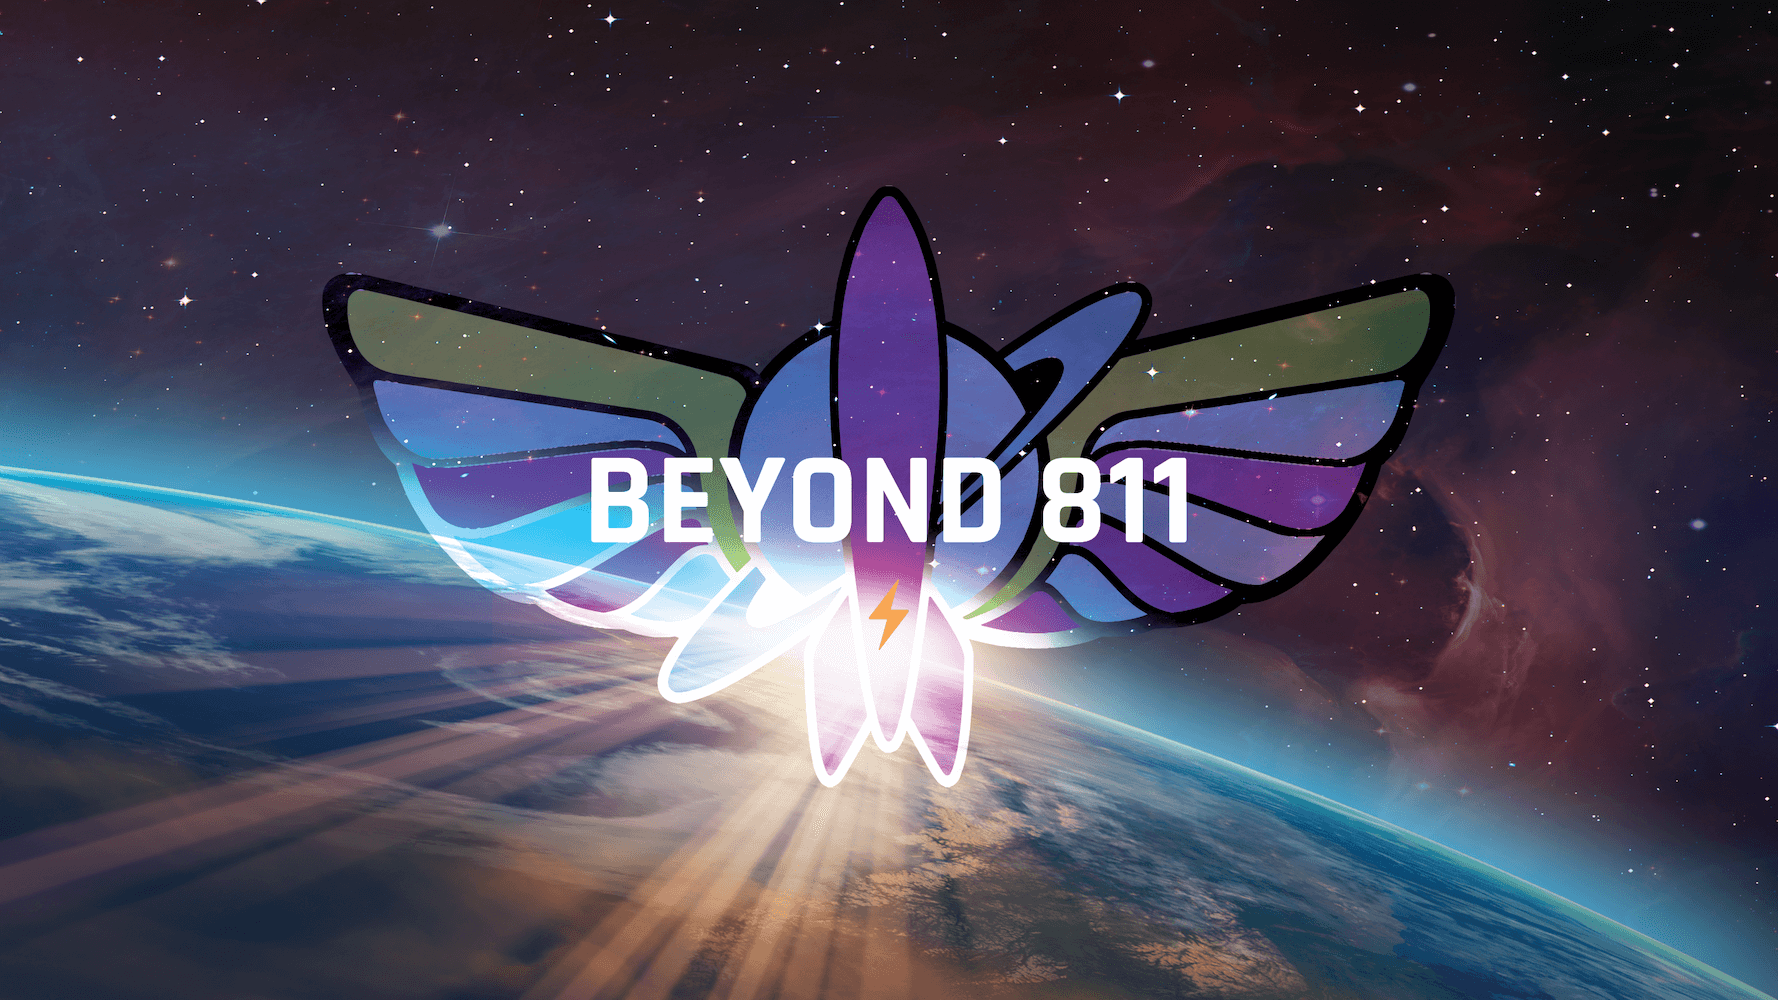 Featured image for “BEYOND 811”